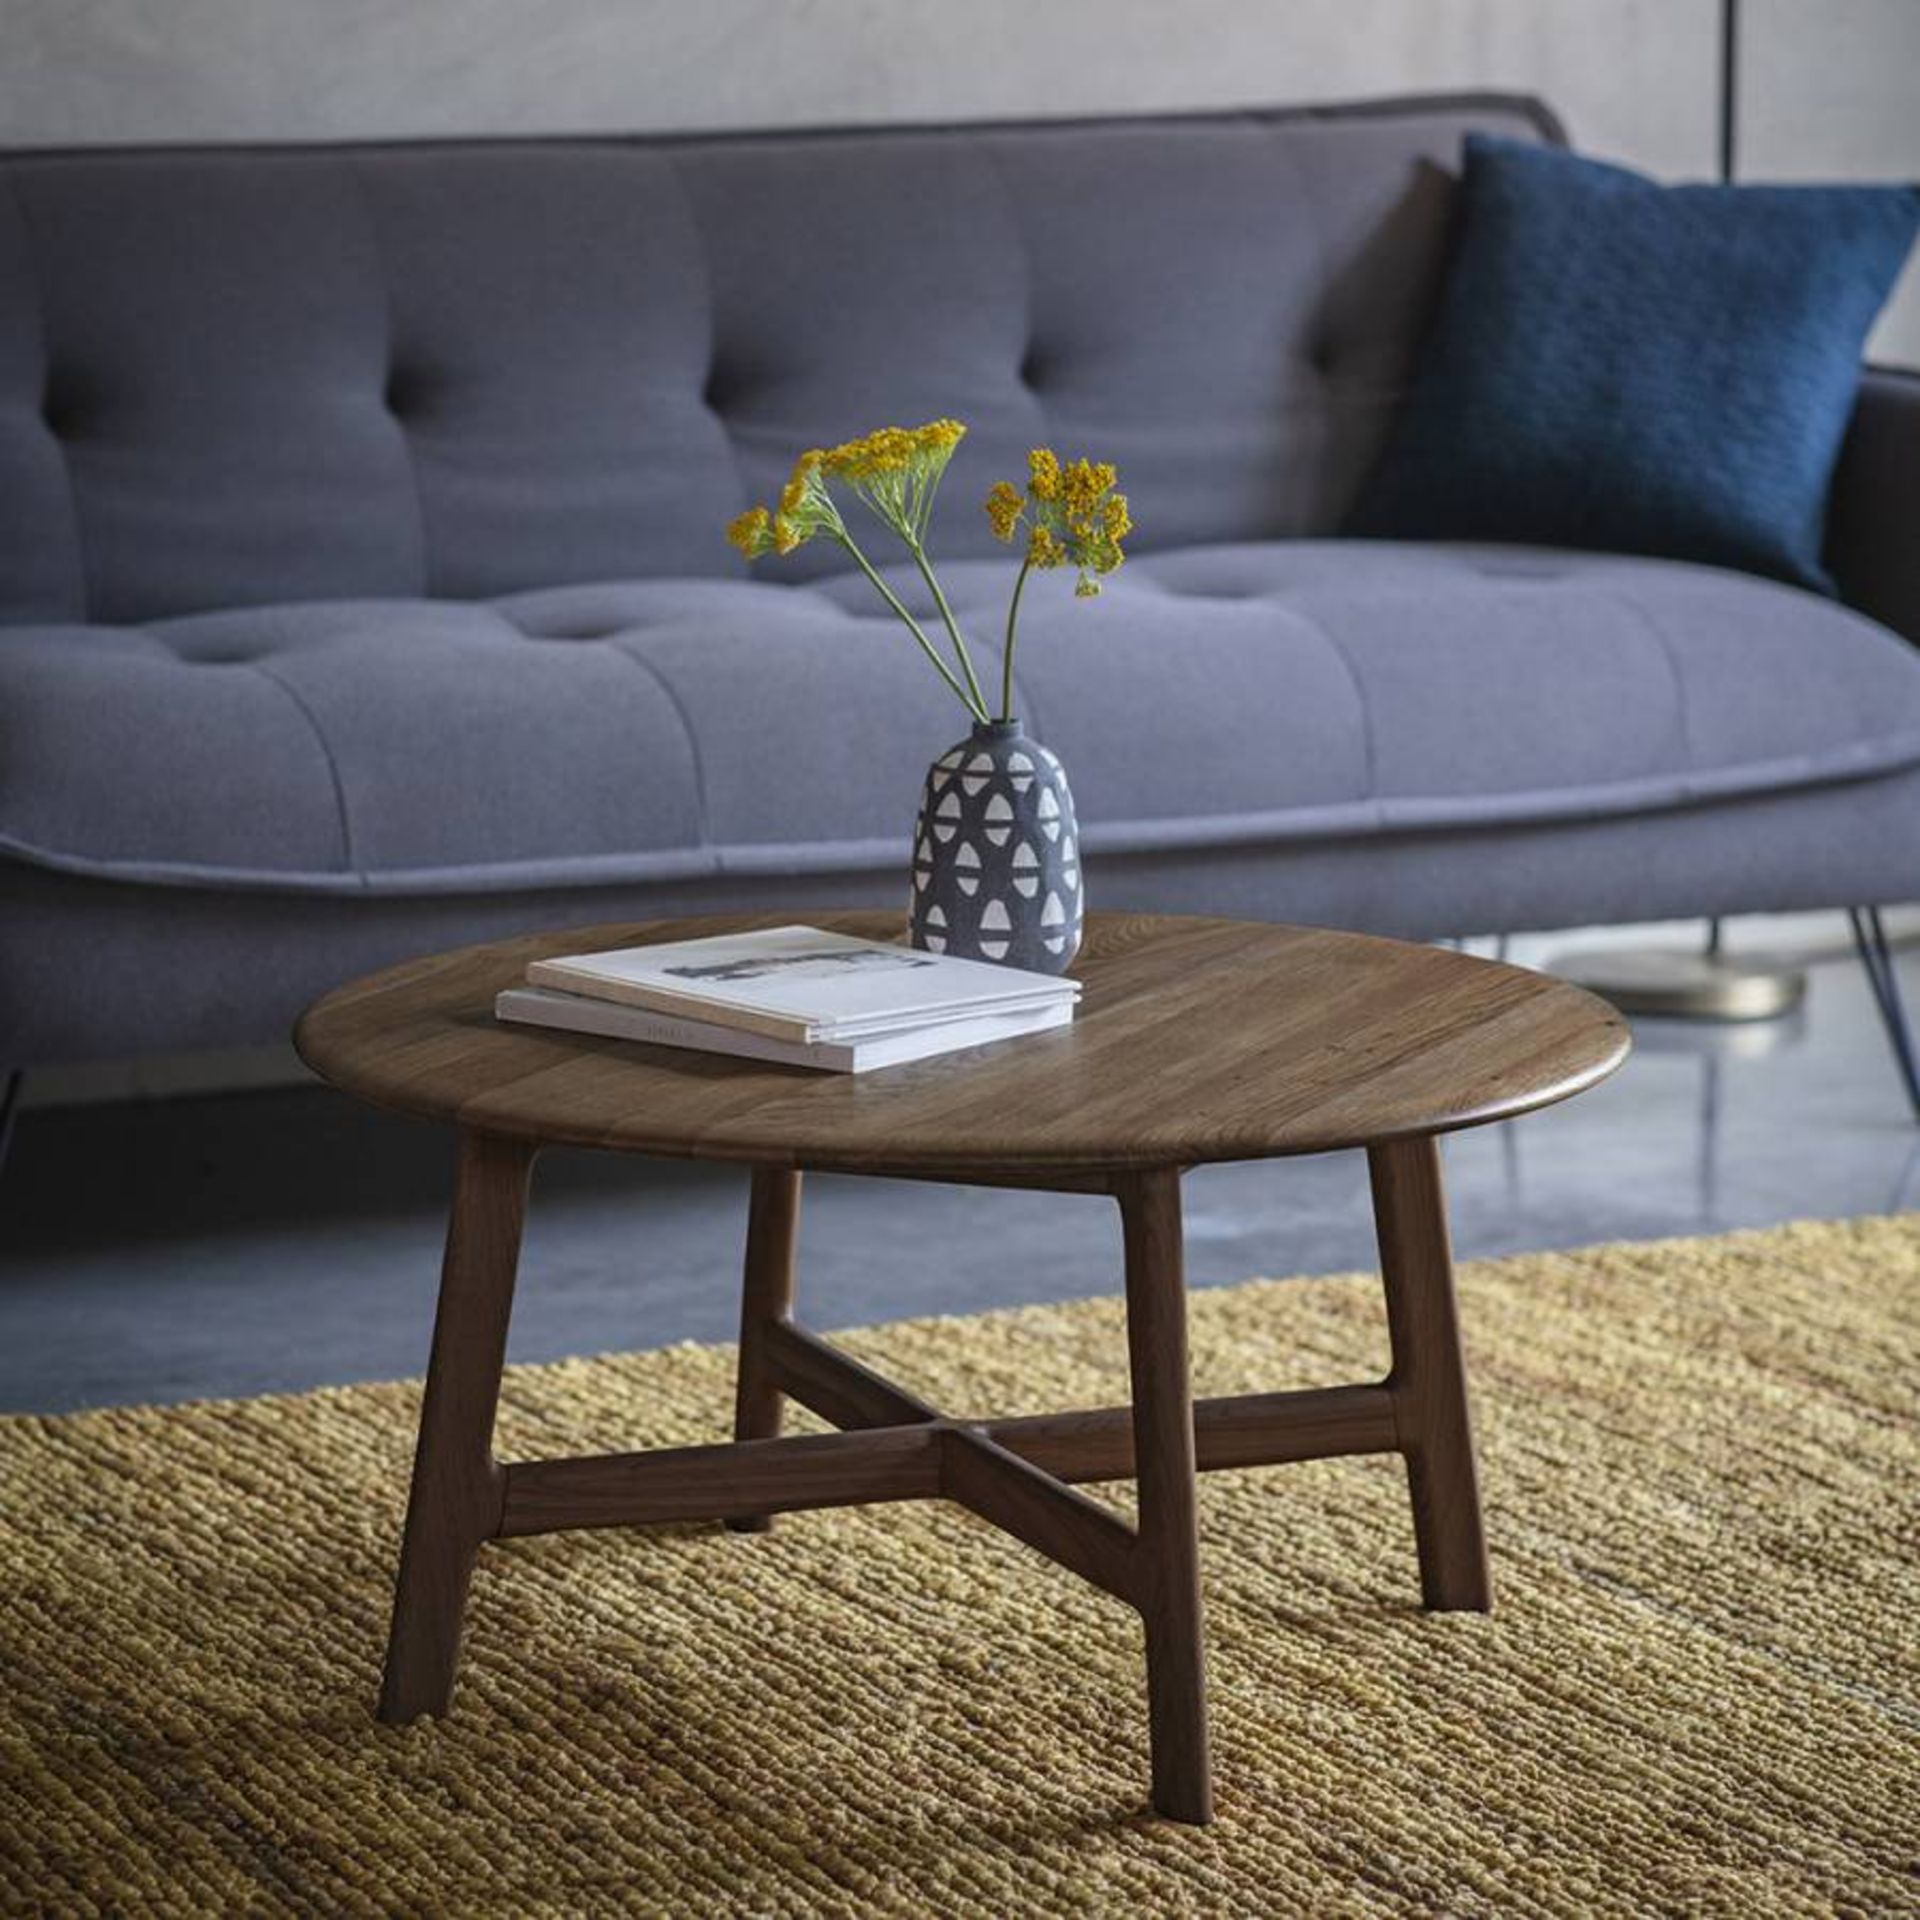 Barcelona Coffee Table Consistent With The Mid-Century Design Offered By The Barcelona Range You Can